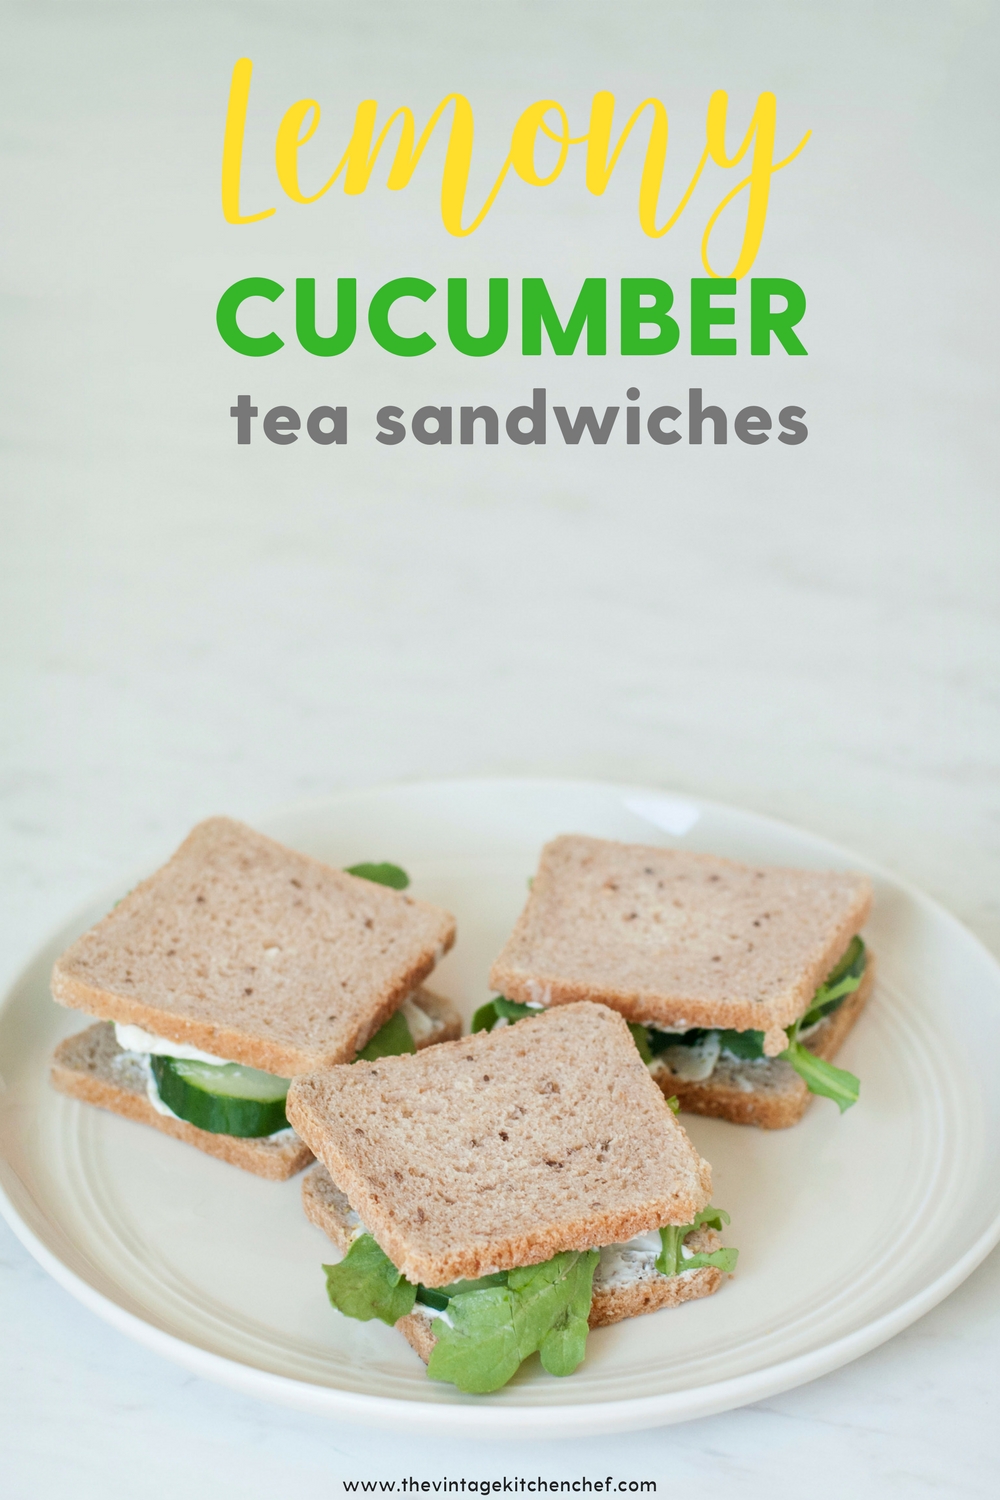 Lemony Cucumber Tea Sandwiches are delightful and incredibly easy. They are the perfect addition for tea time or anytime!